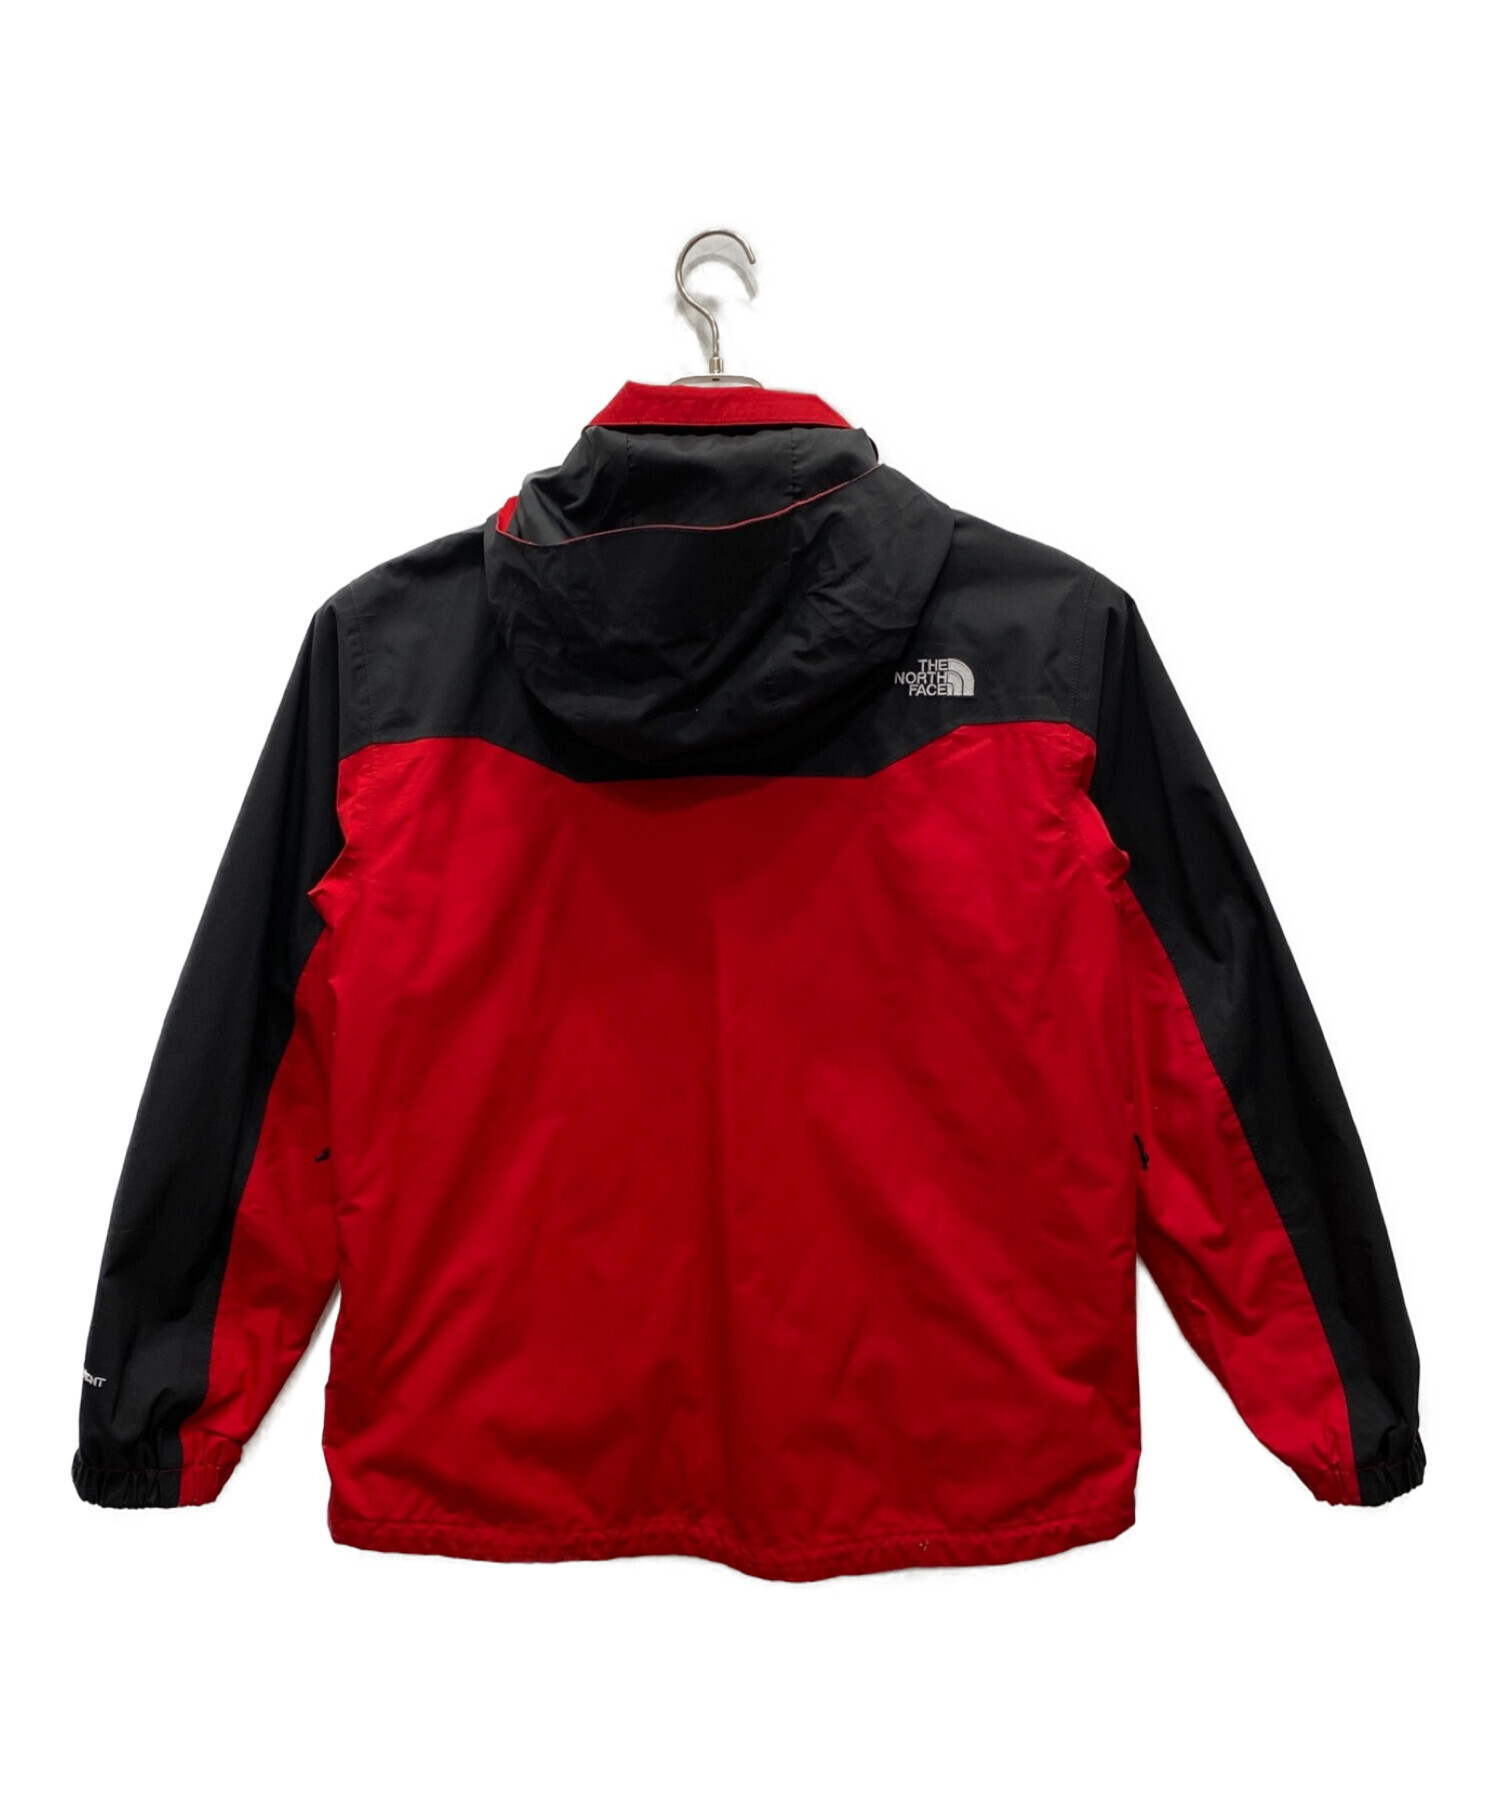 THE NORTH FACEマウンテンパーカーblack×red